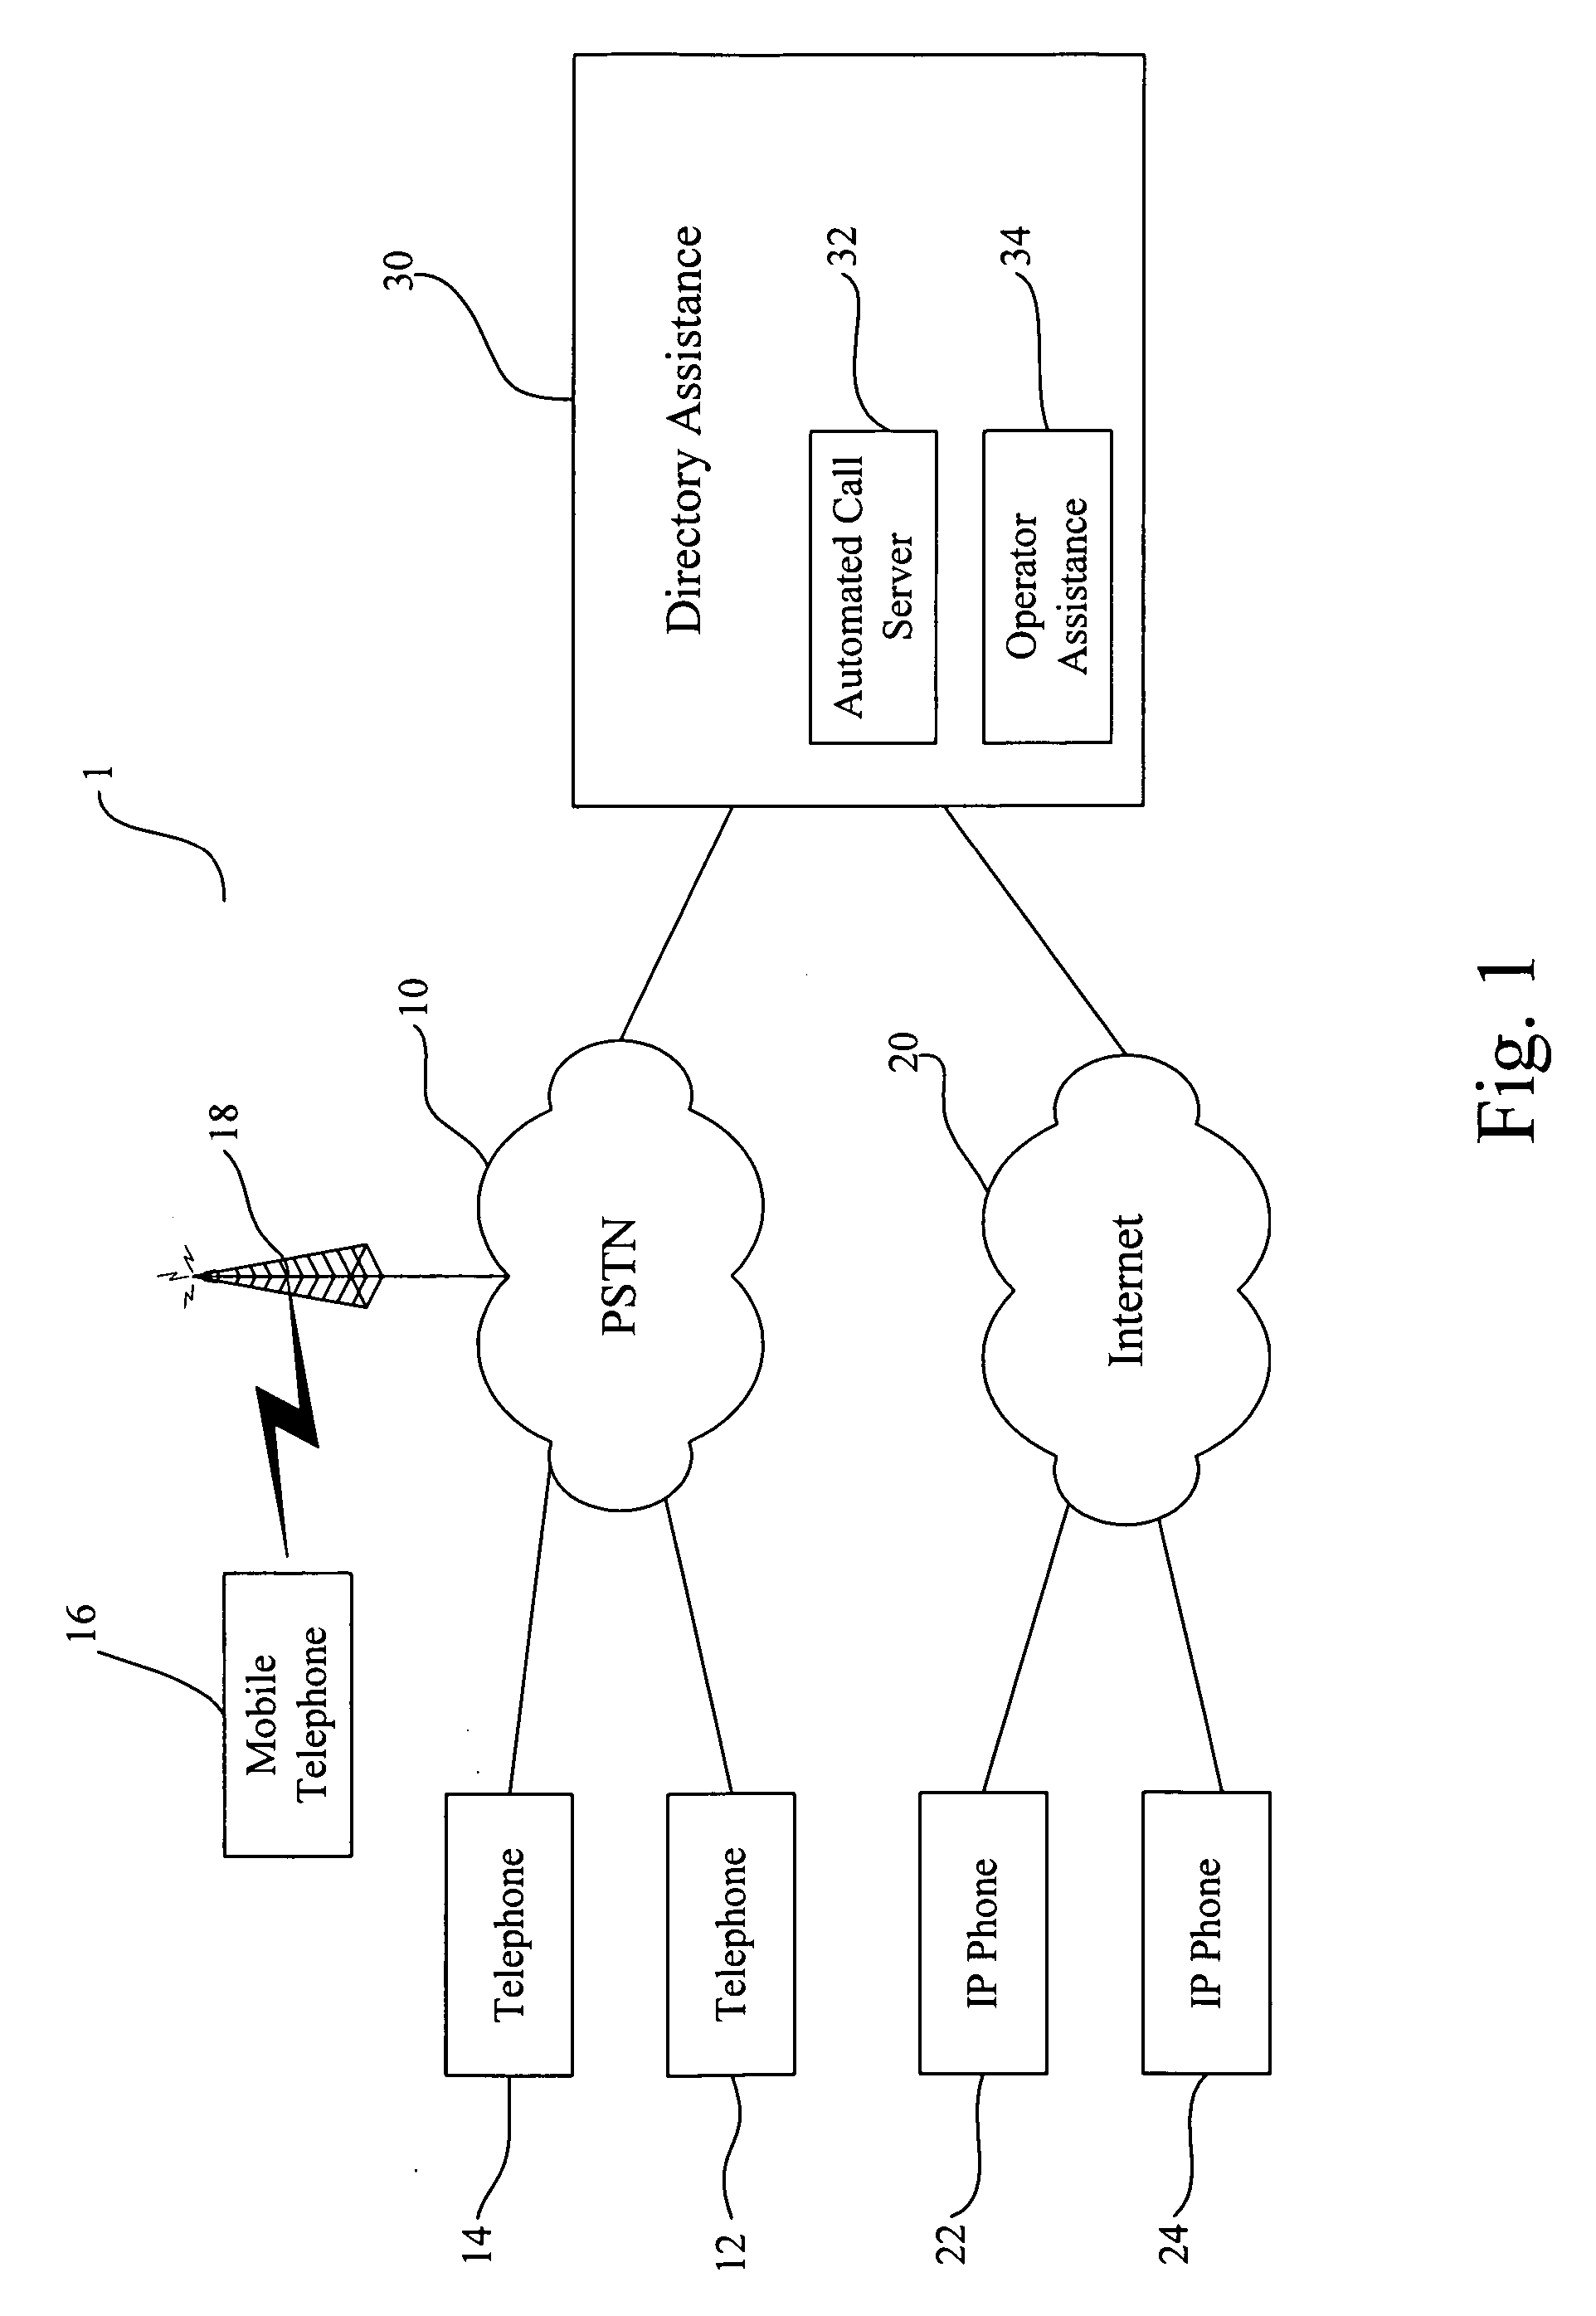 System and method for handling a voice prompted conversation